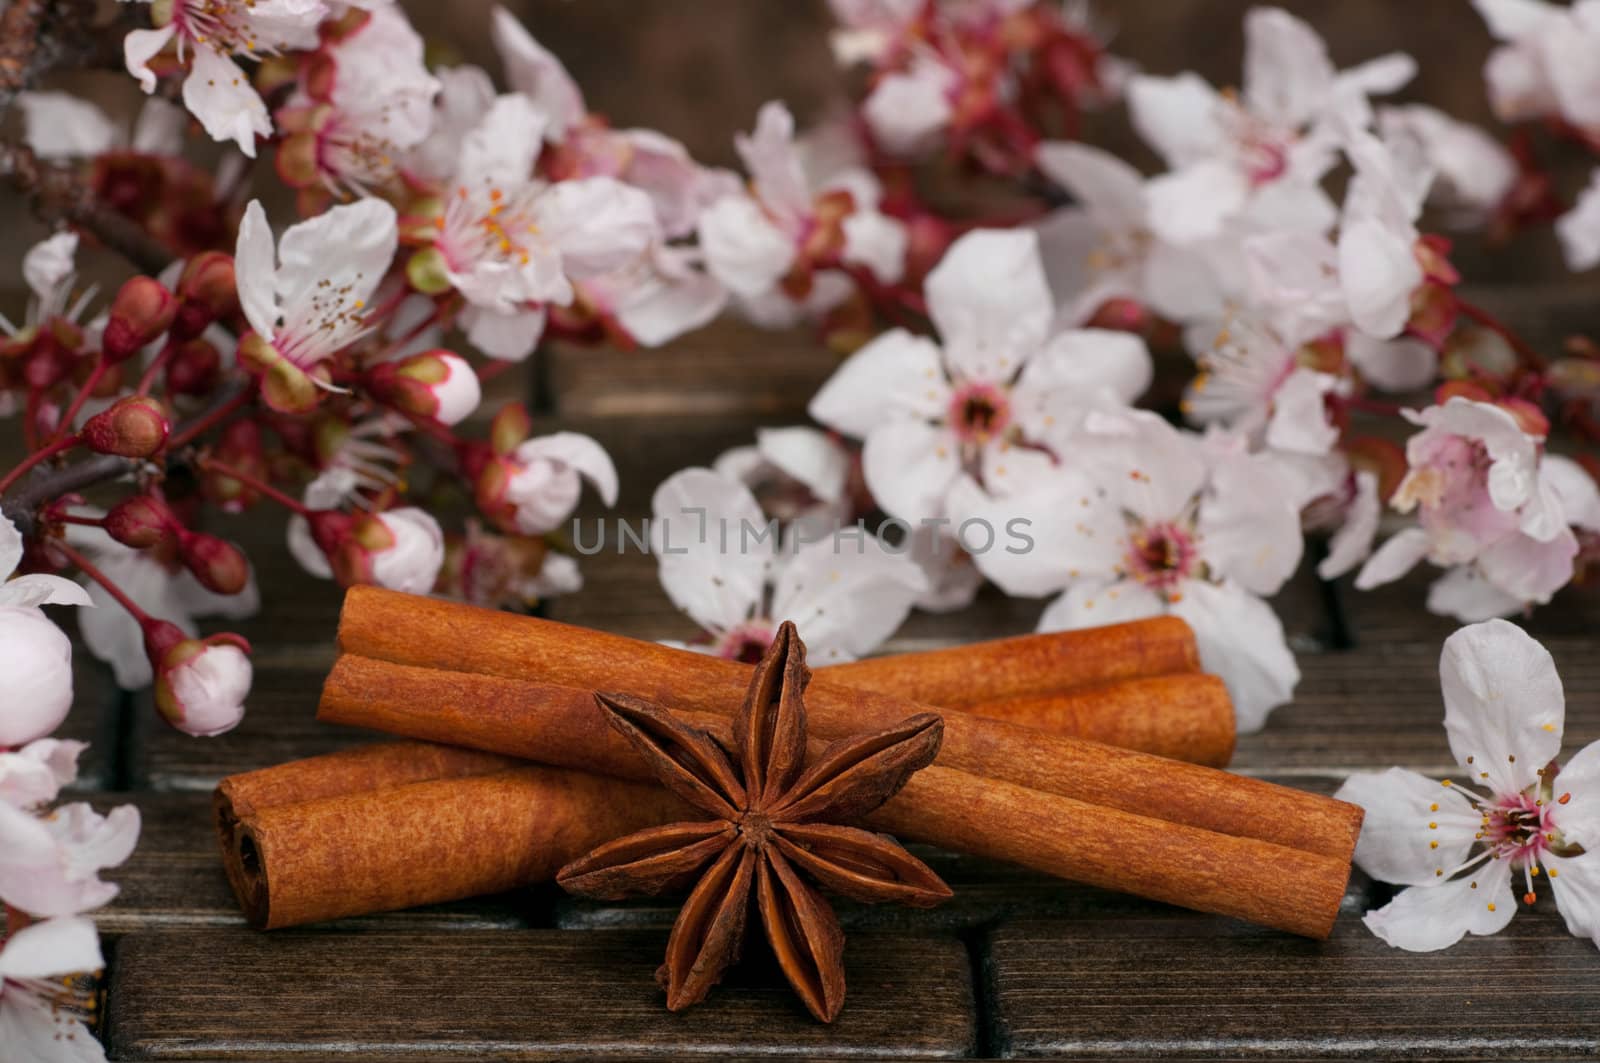 Aromatic spices, anise and cinnamon sticks